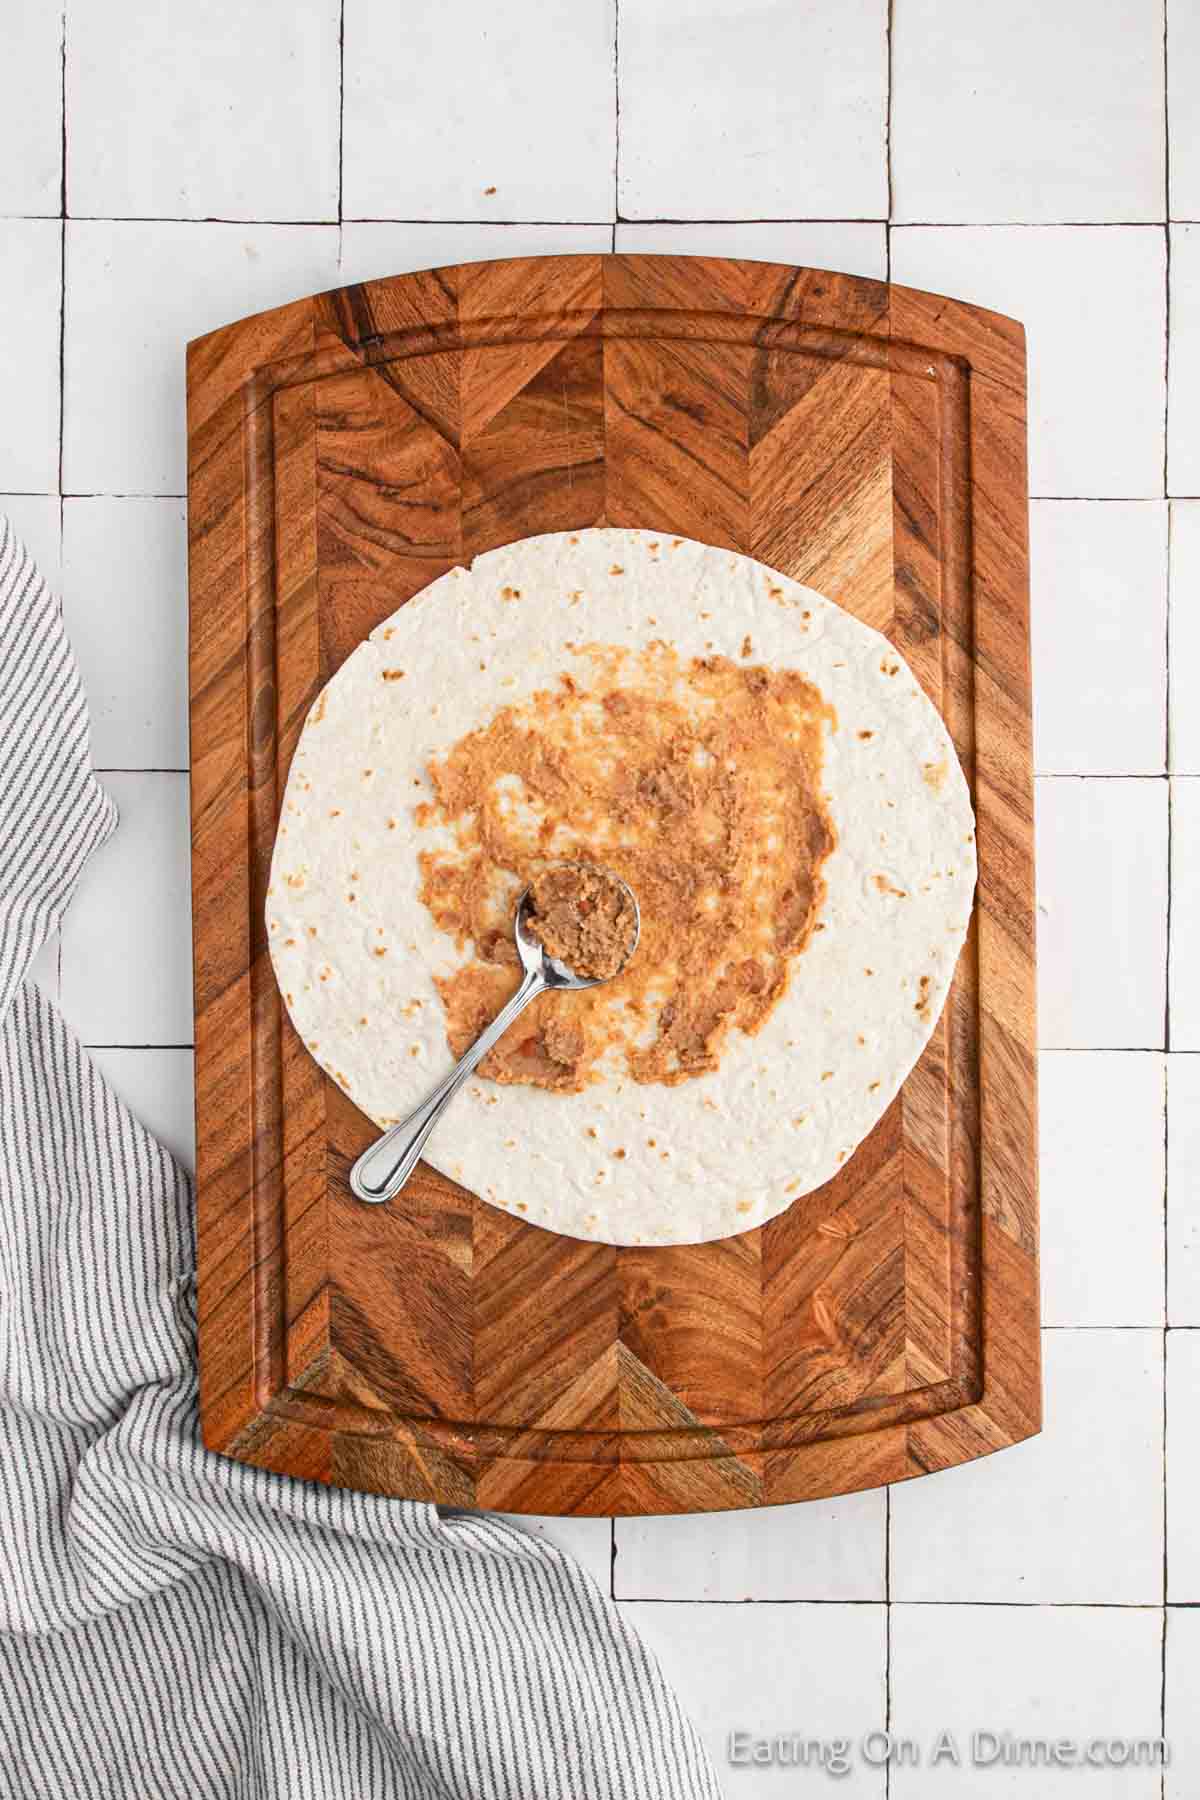 Spreading refried beans on a tortilla